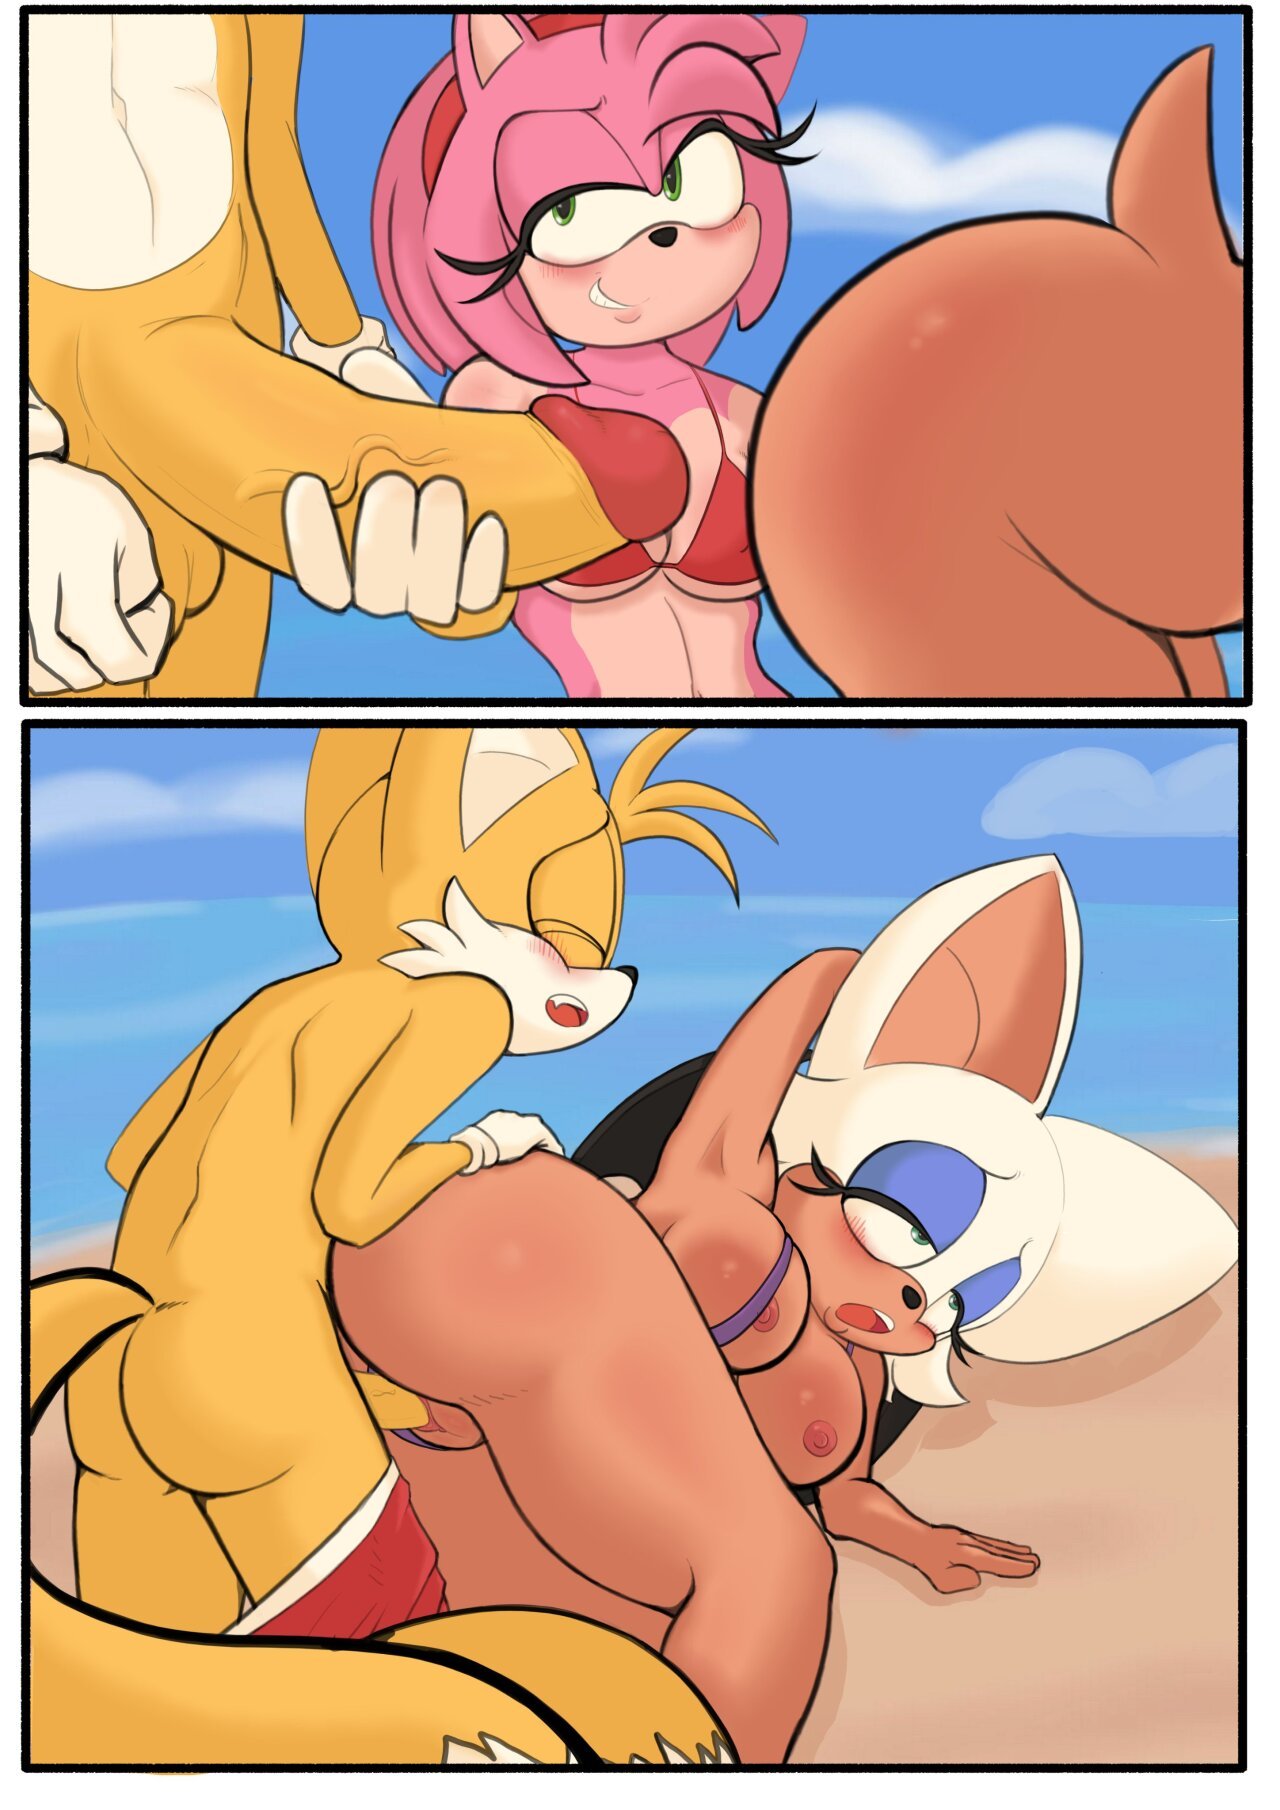 Tails at the Beach - 3